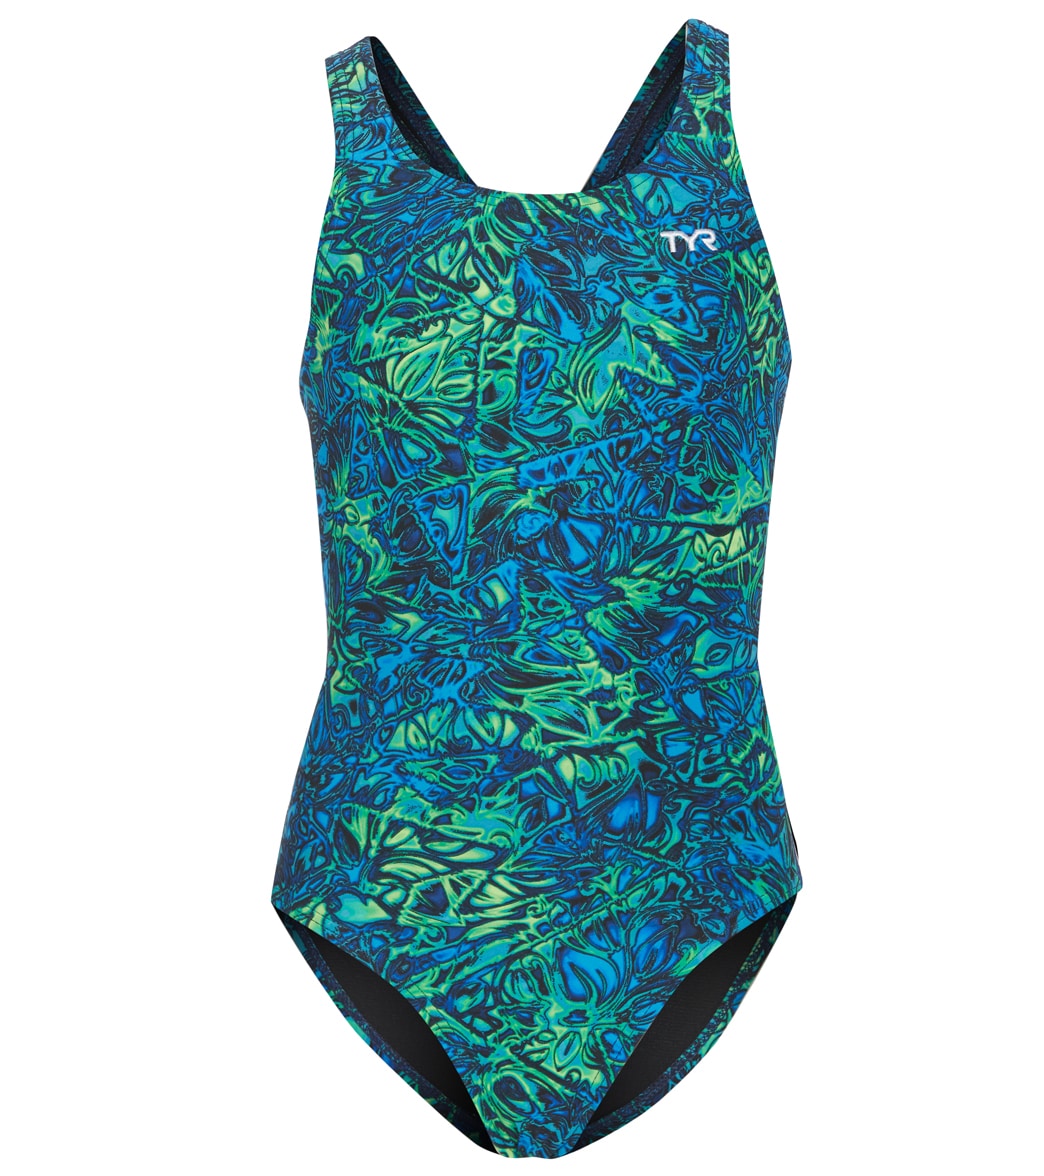 TYR Girls' Nebulous Maxfit One Piece Swimsuit Blue/Green at SwimOutlet.com